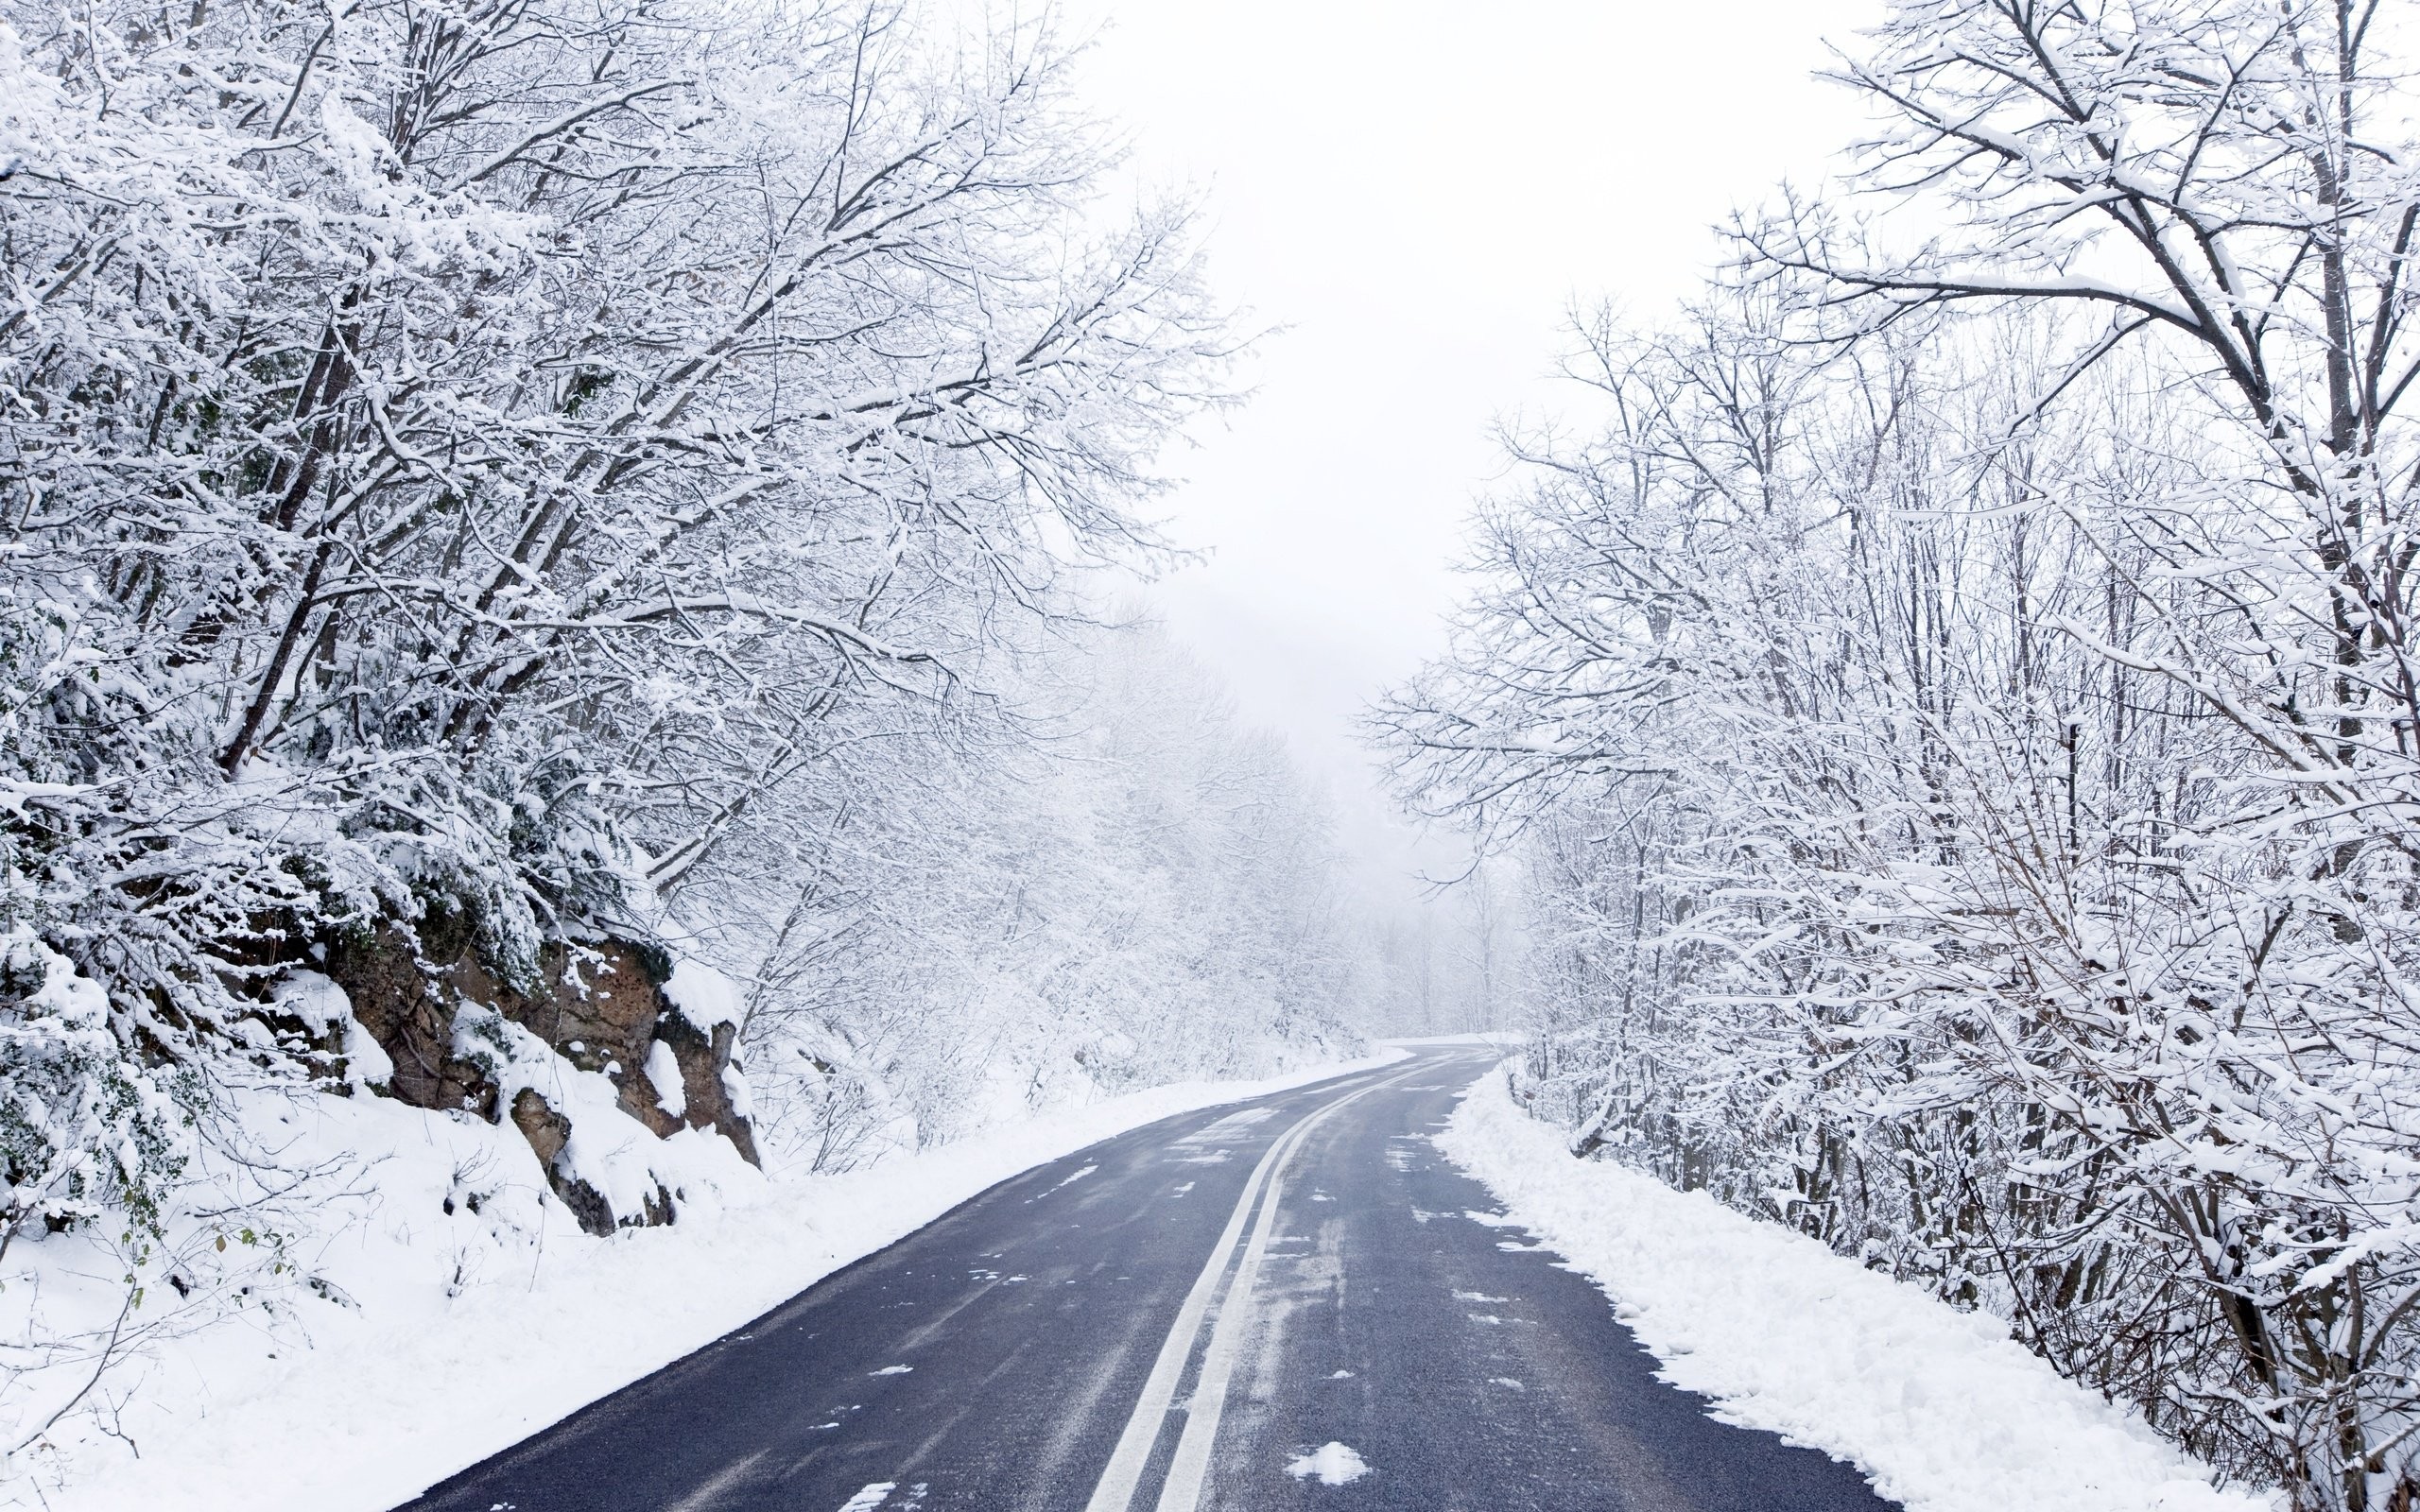 General 2560x1600 road winter forest asphalt outdoors cold snow ice